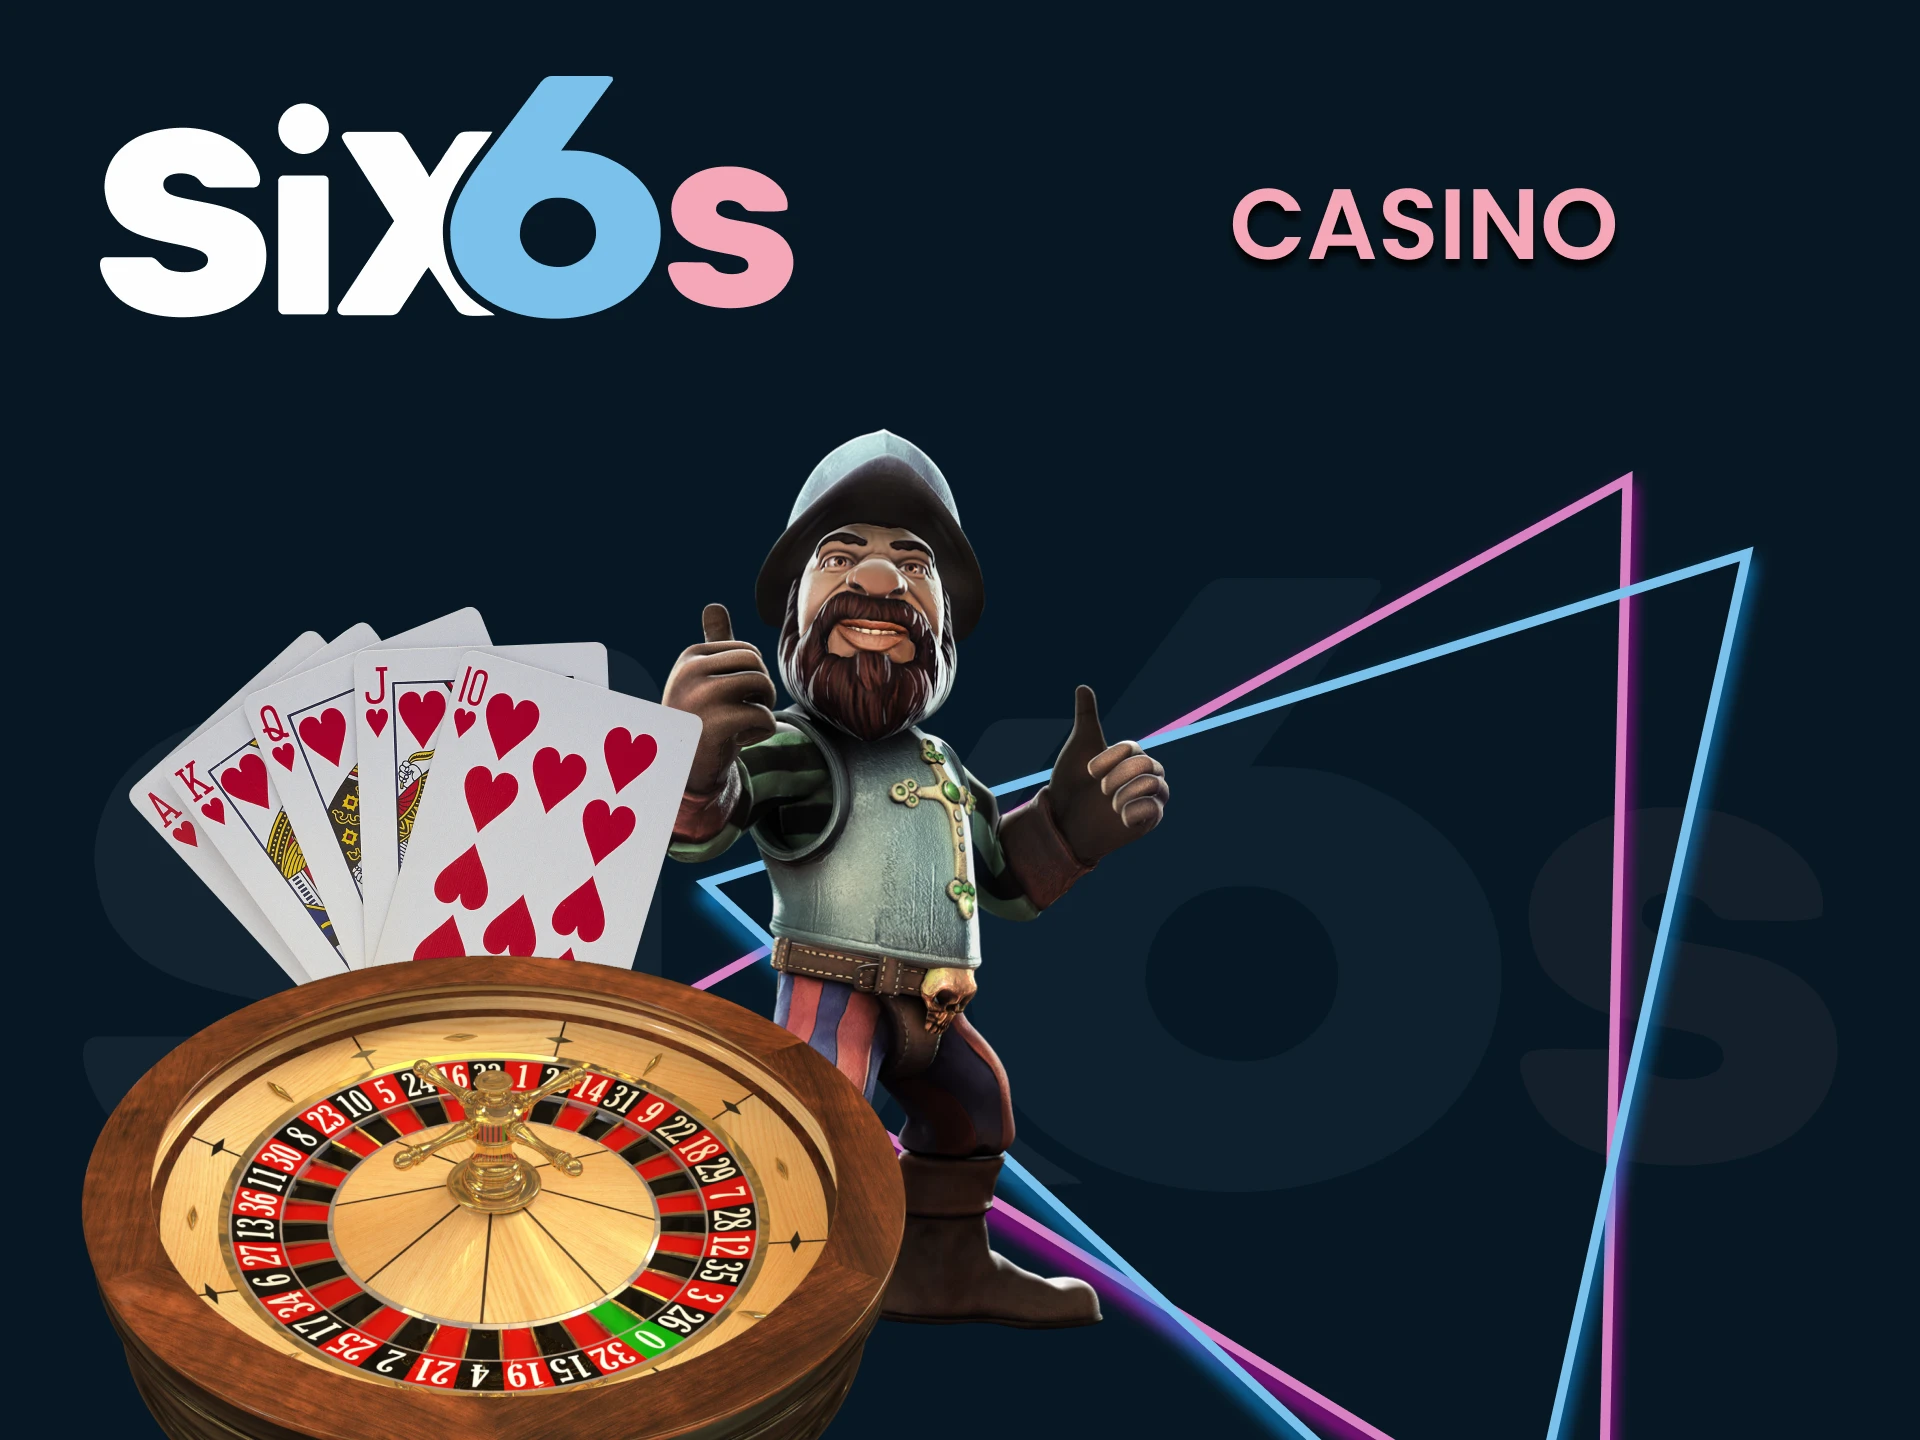 Play casino with Six6s.